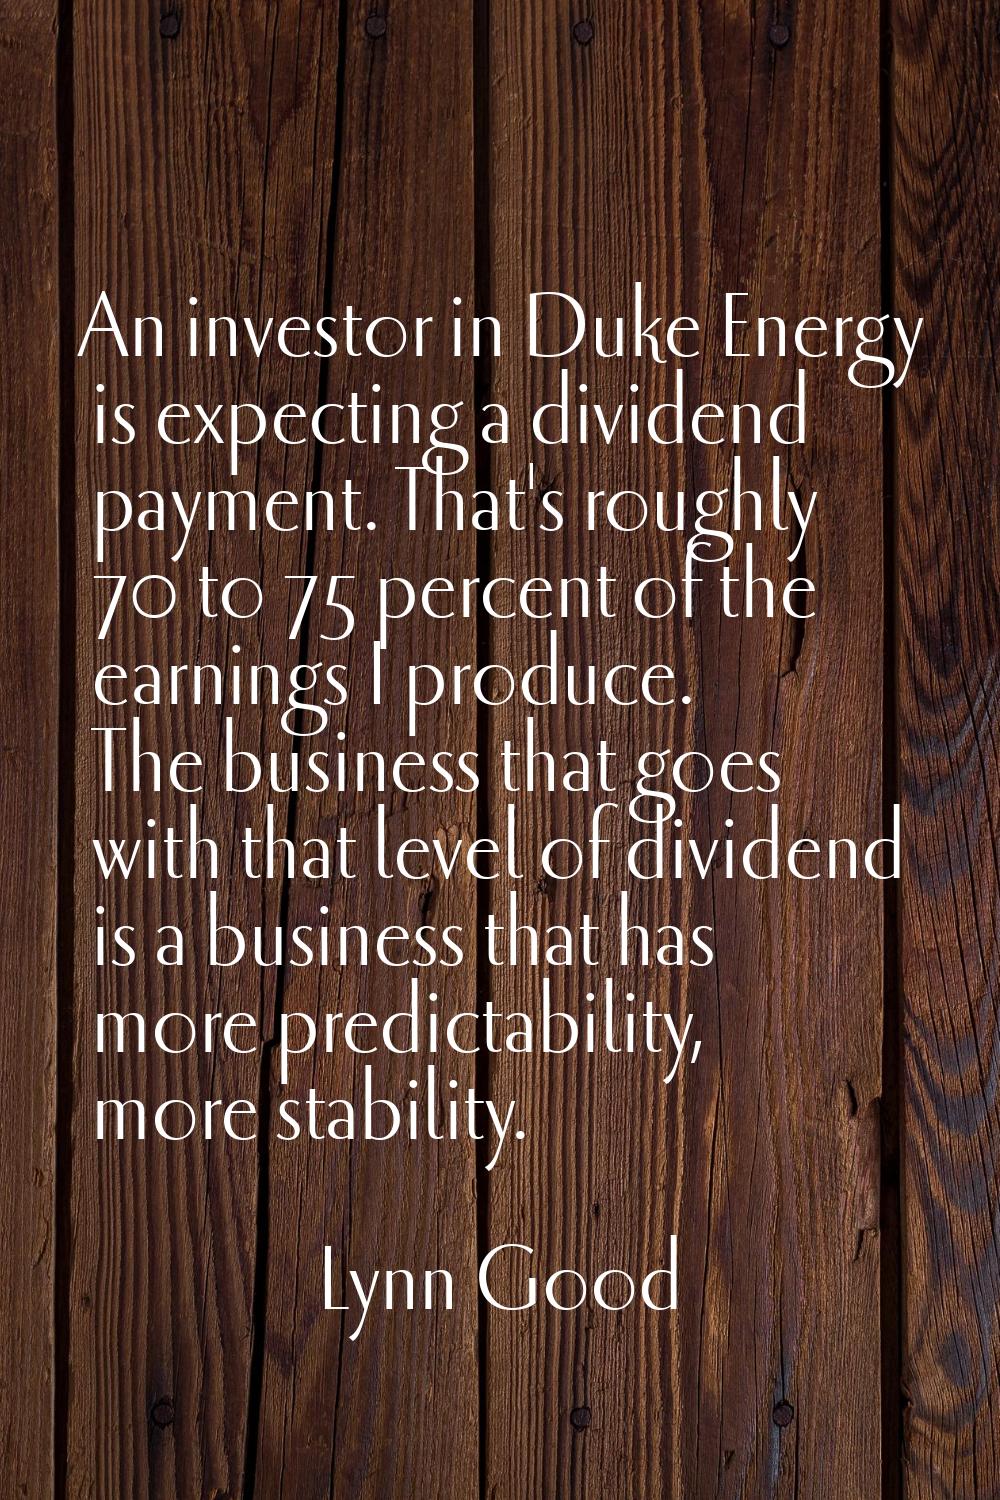 An investor in Duke Energy is expecting a dividend payment. That's roughly 70 to 75 percent of the 